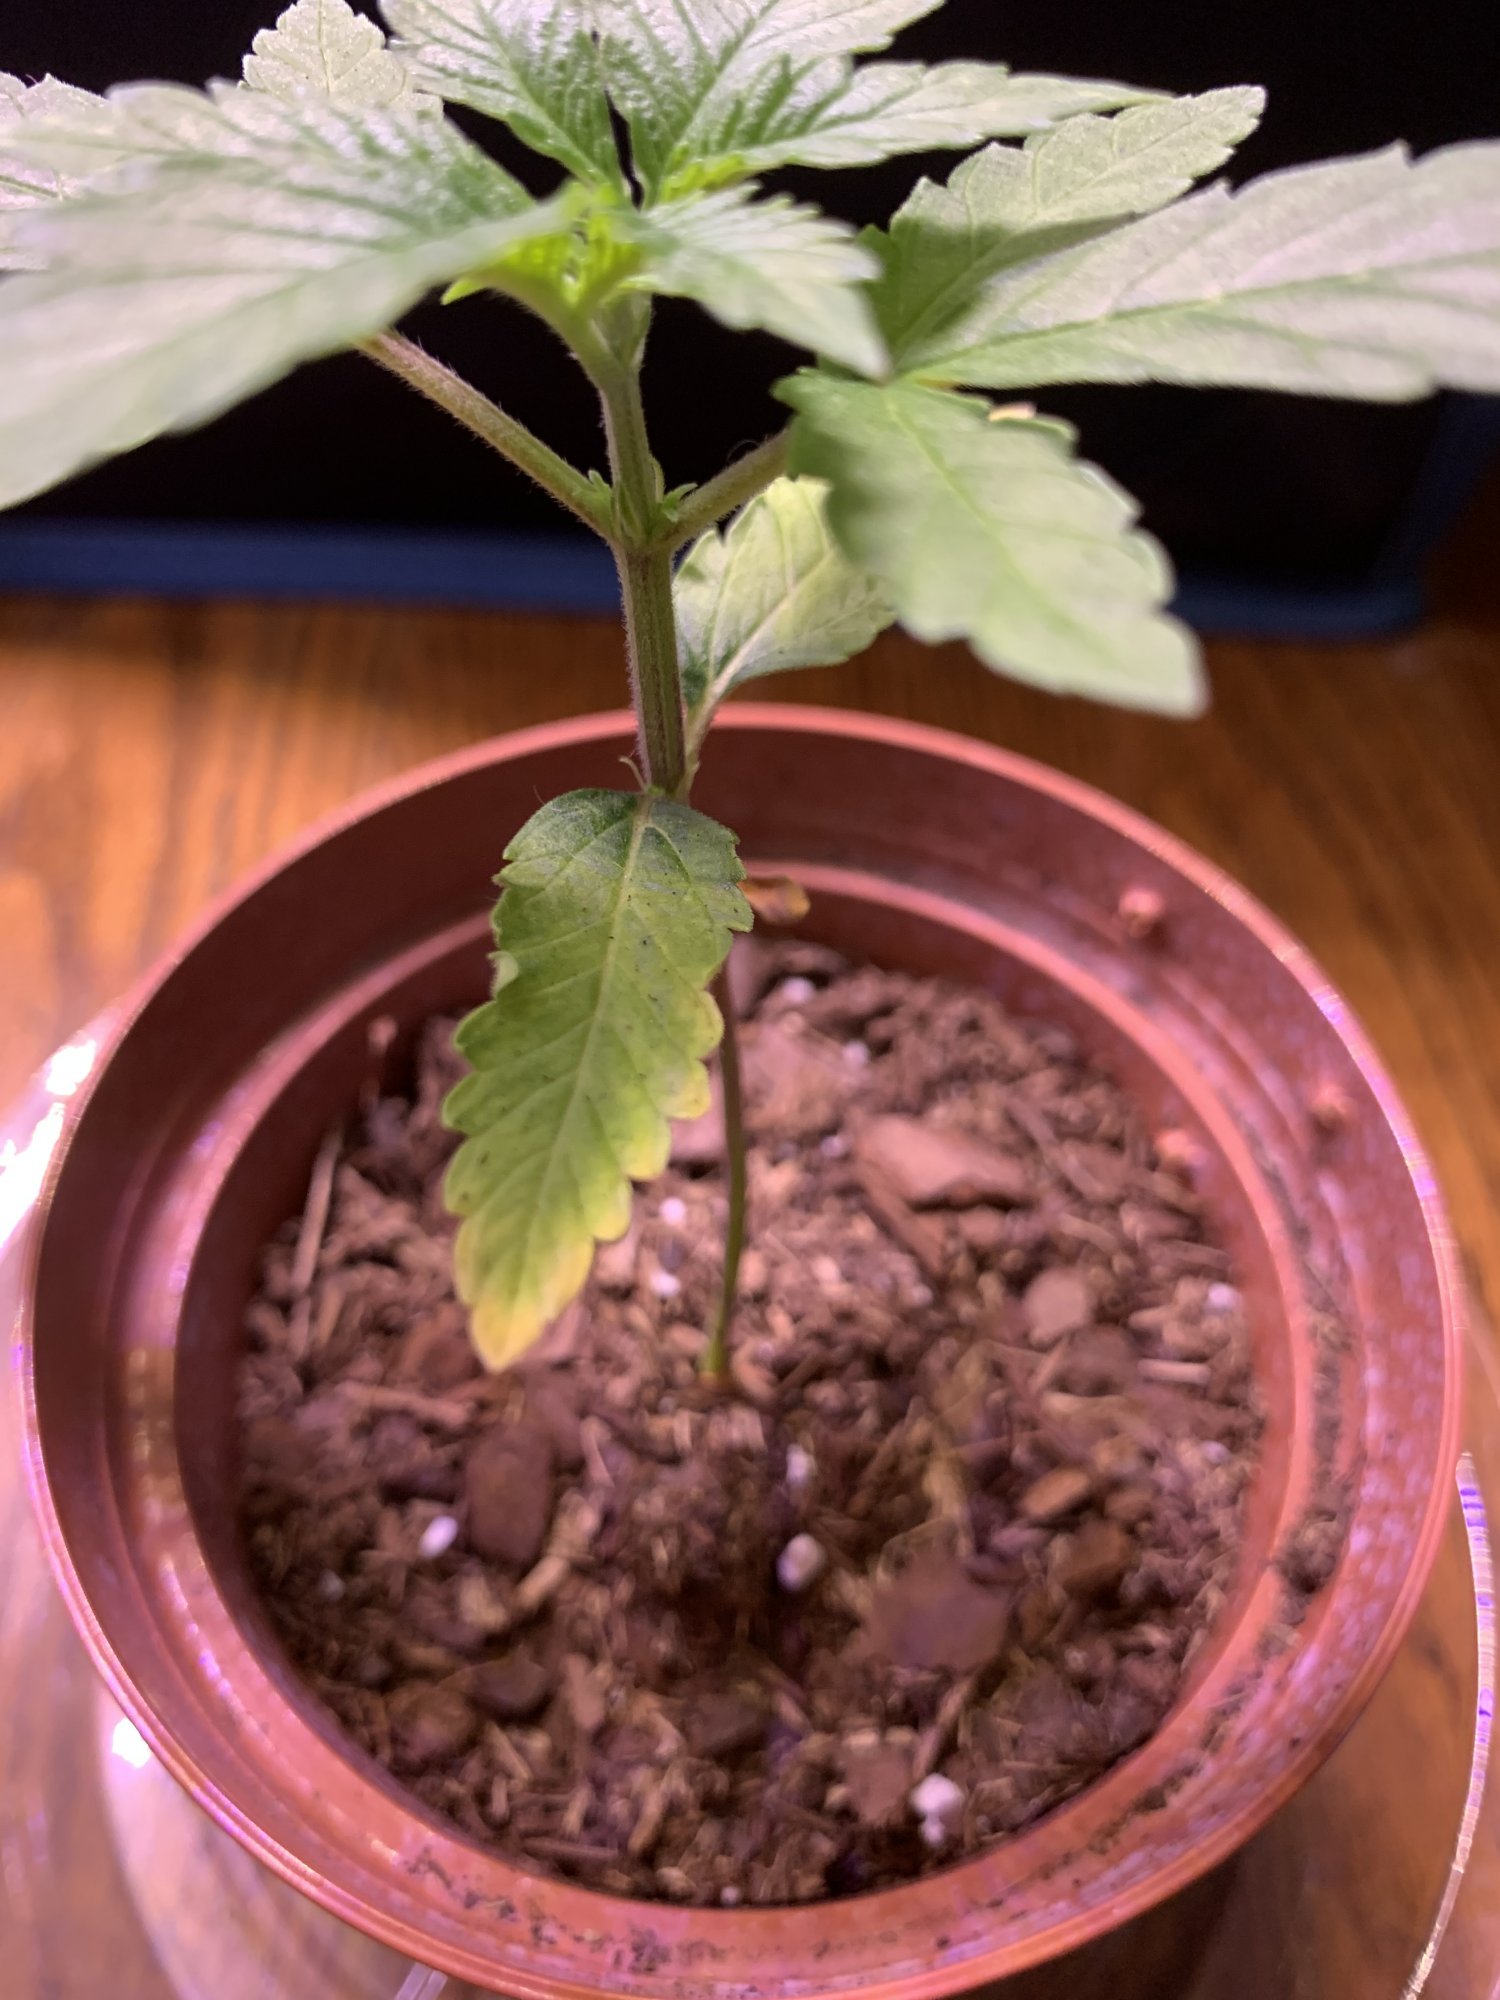 First time grower yellowing leaves 5